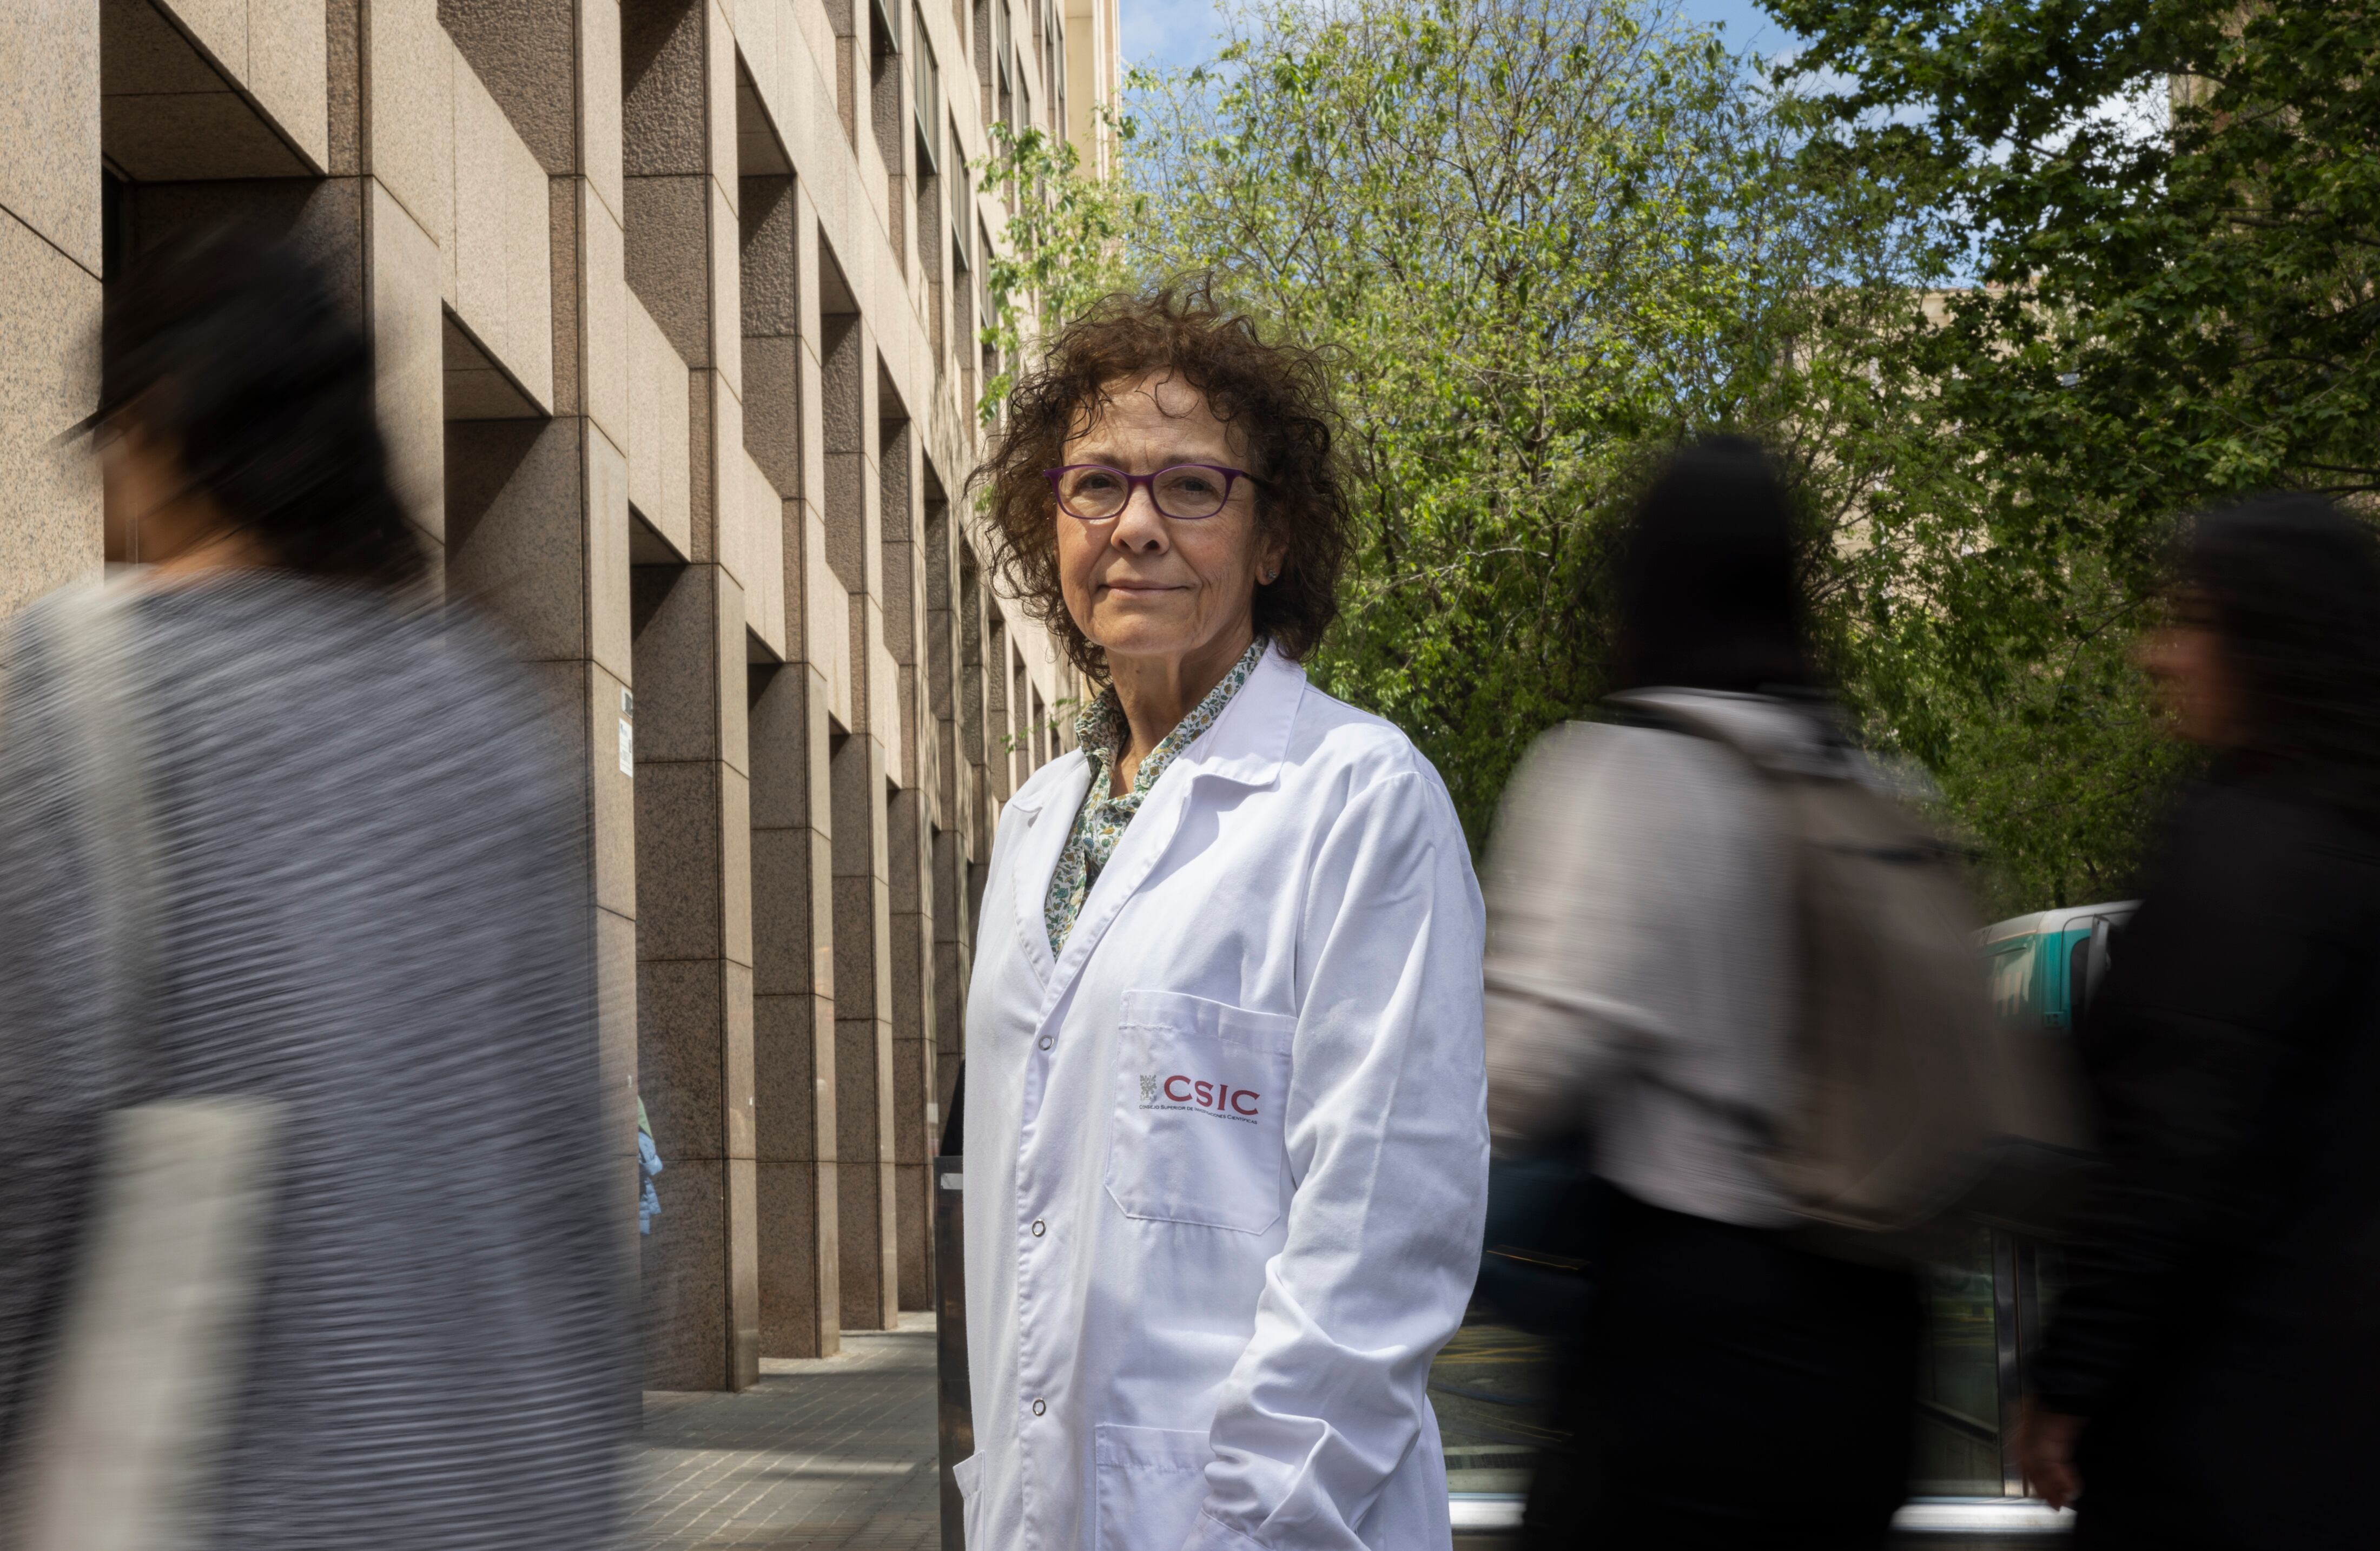 Coral Sanfeliu, director of the Neurodegeneration and Aging Group of the Barcelona Biomedical Research Institute.